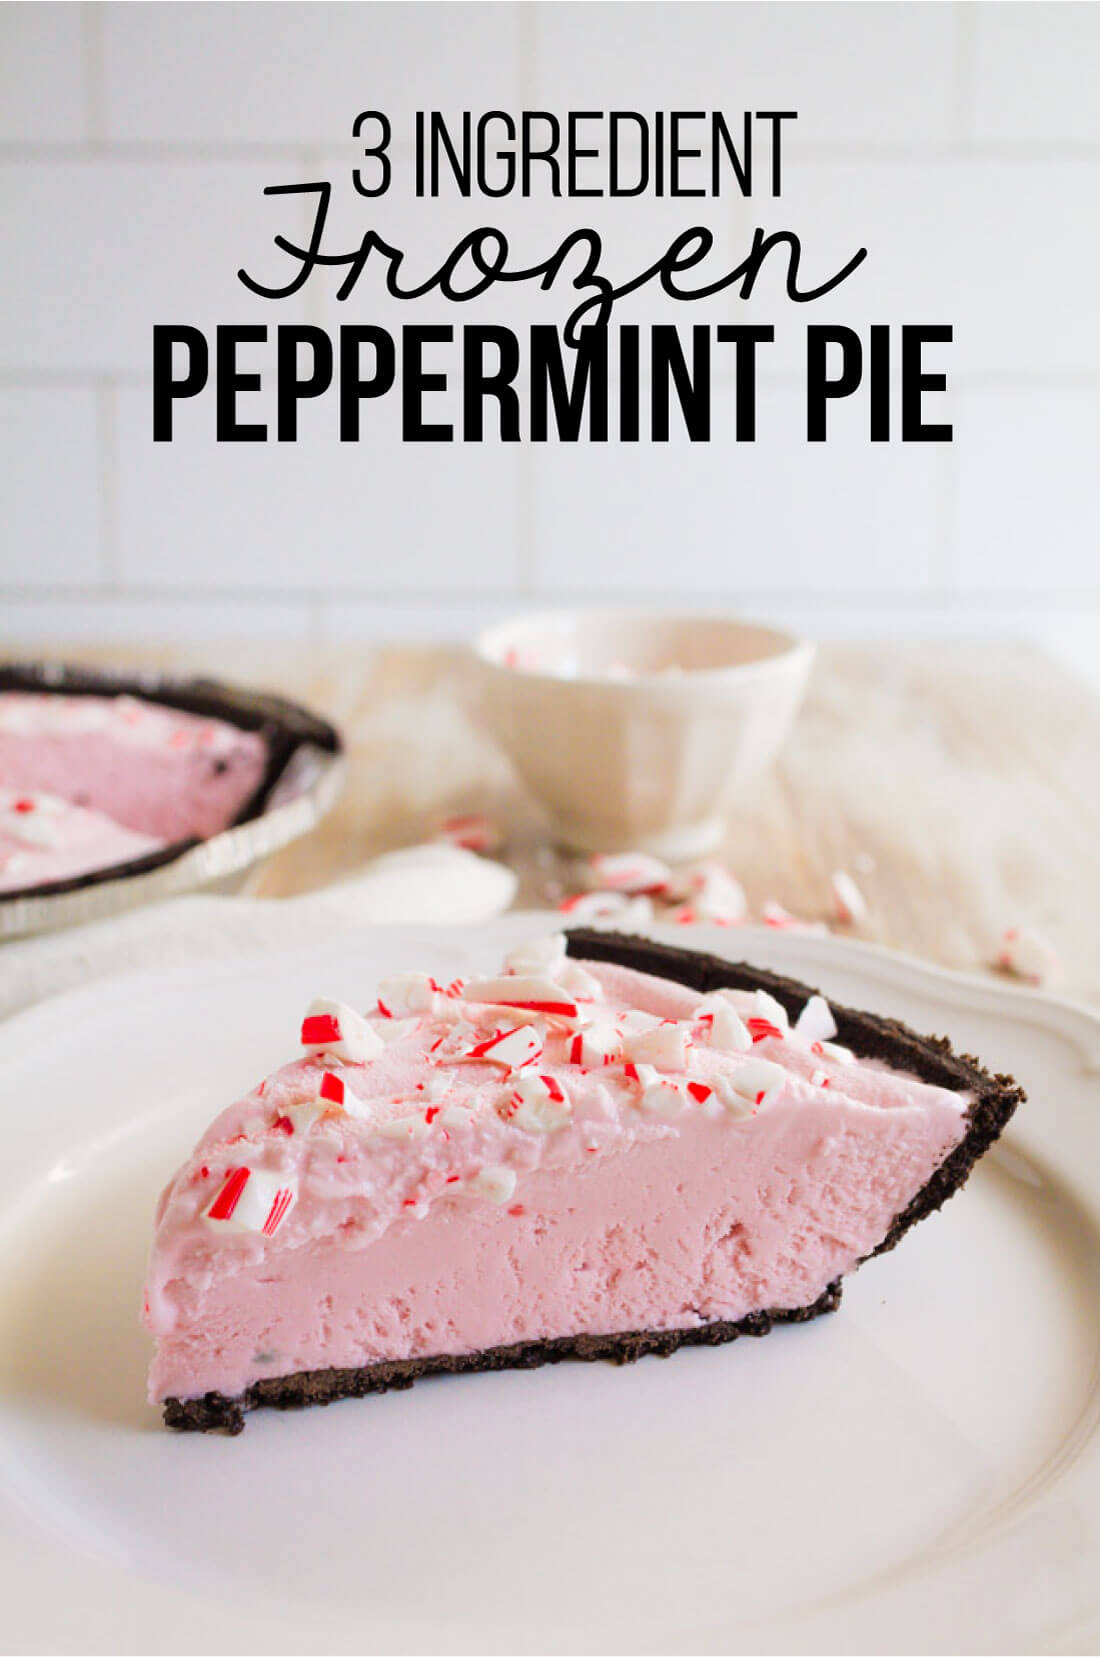 3 Ingredient Frozen Peppermint Pie and other peppermint projects www.thirtyhandmadedays.com